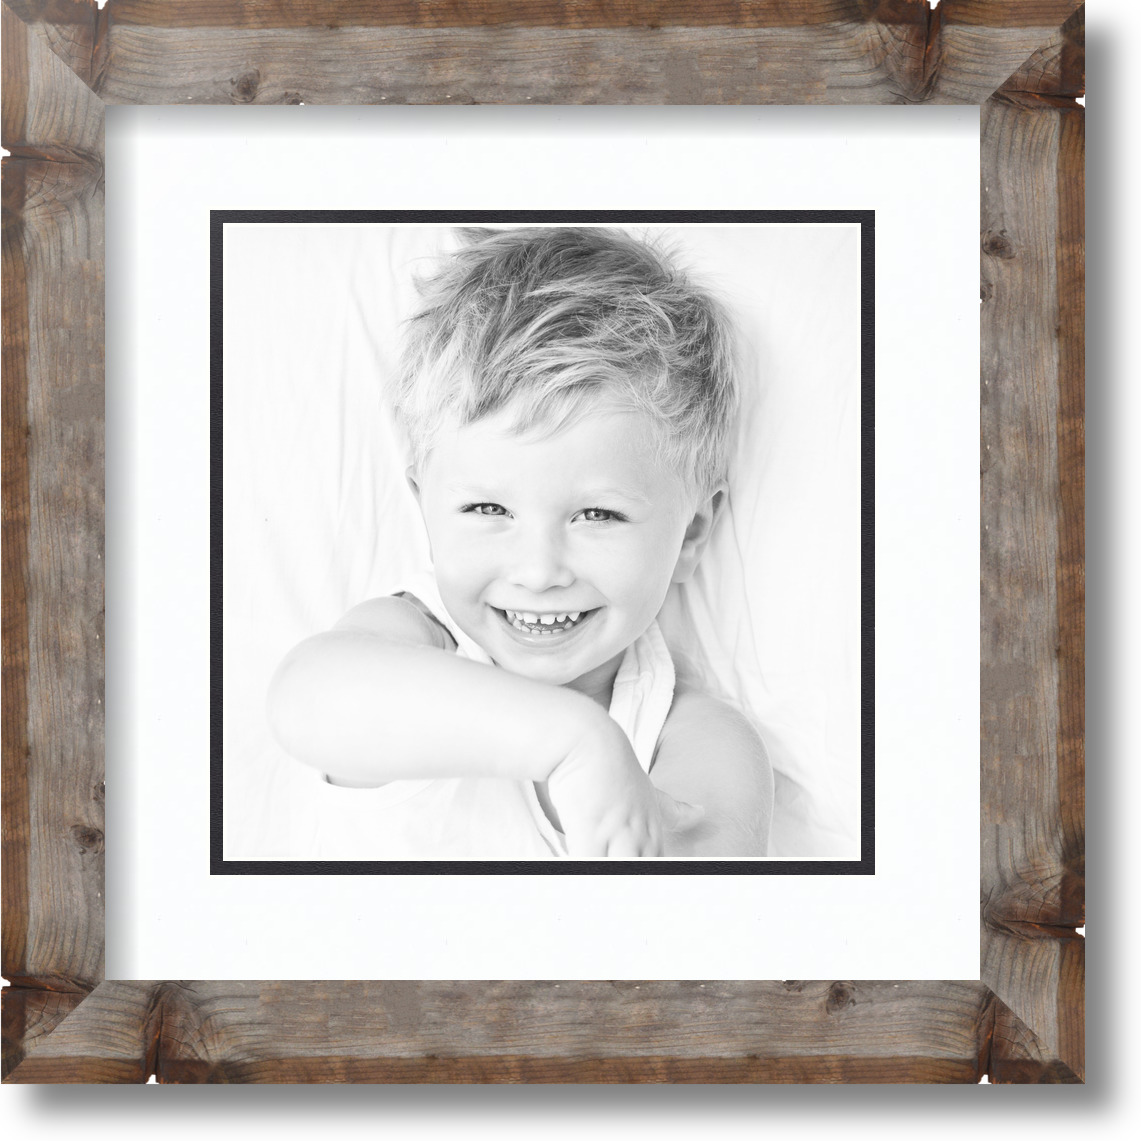 10x10 Opening ArtToFrames Matted 14x14 Natural Picture Frame with 2" Double Mat 